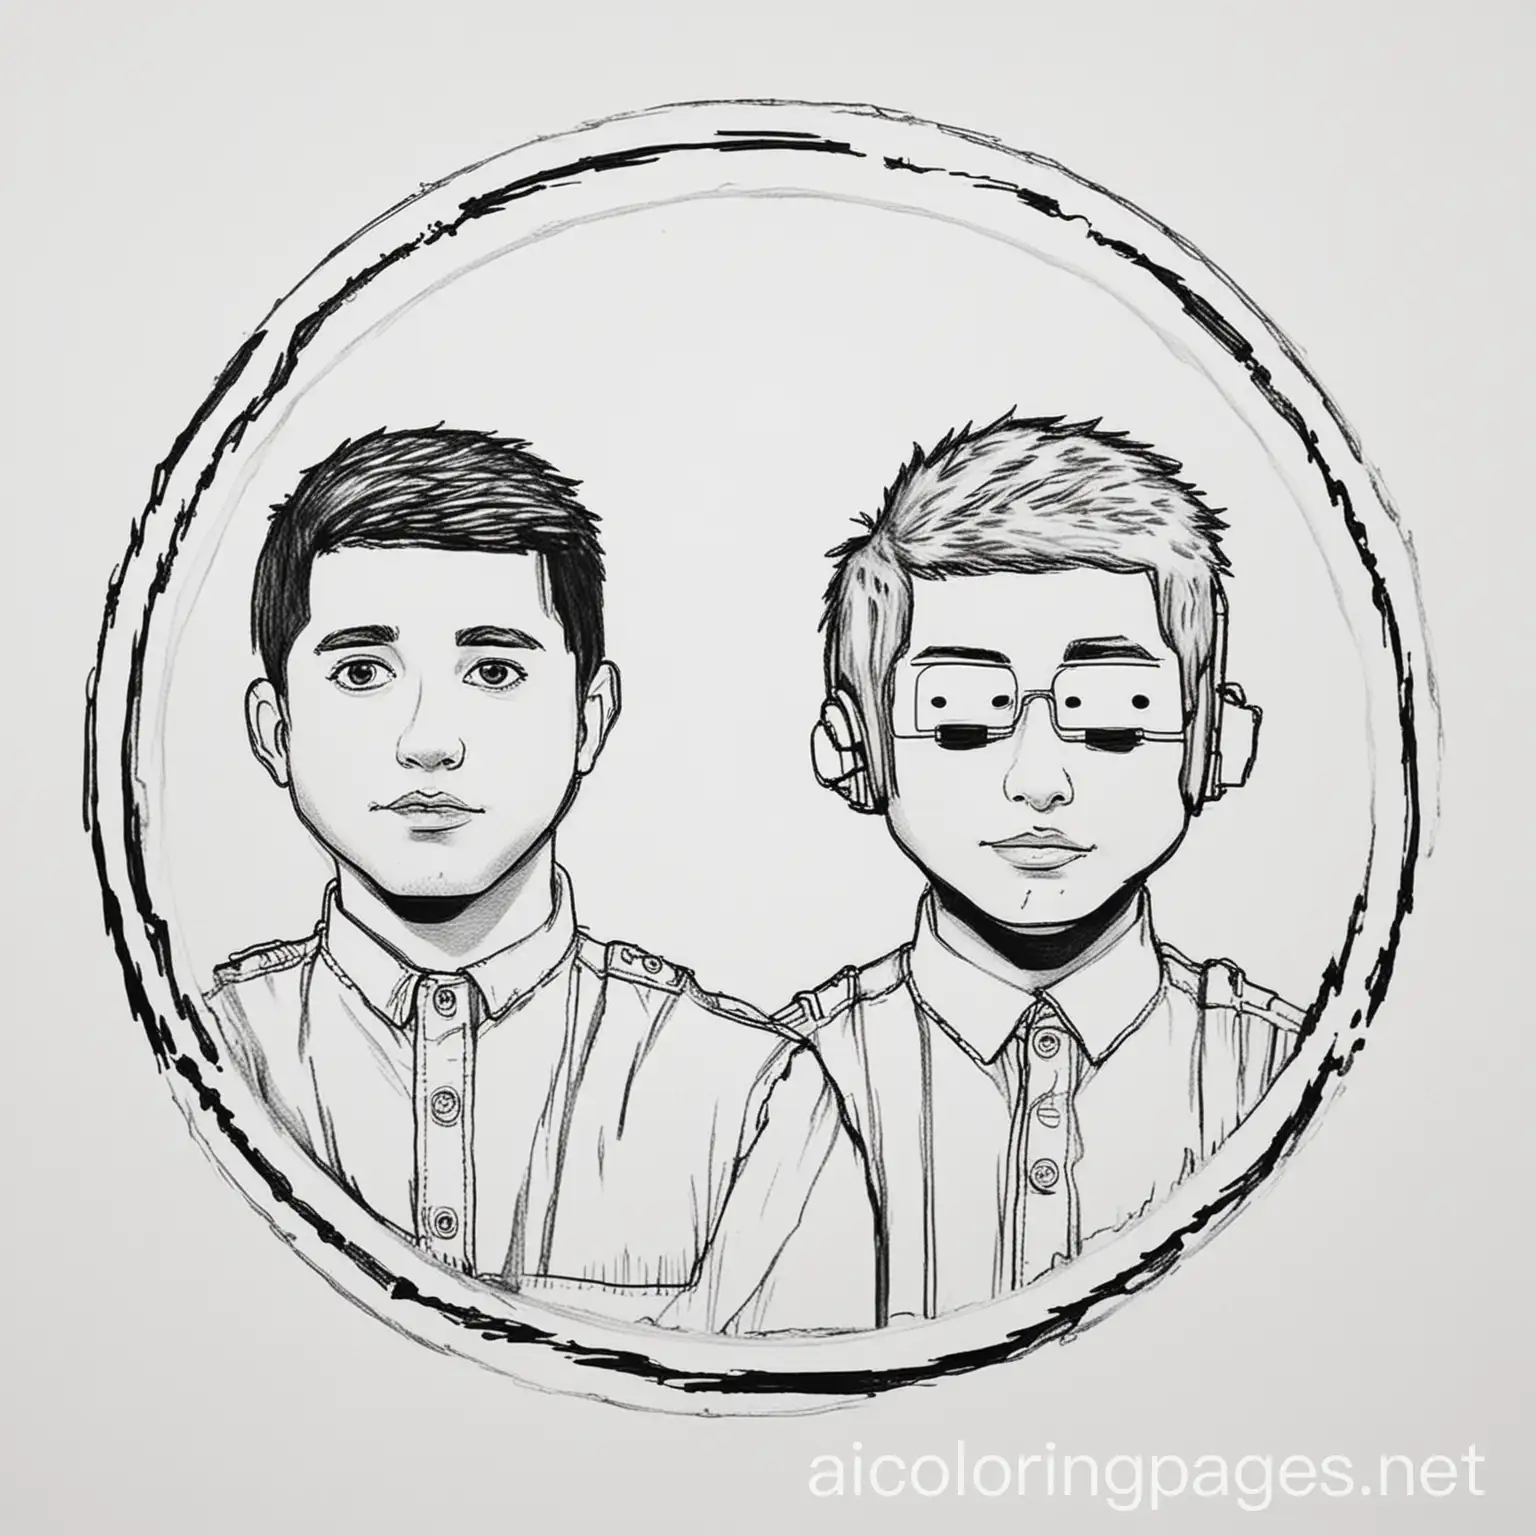 Twenty One pilots album cover, Coloring Page, black and white, line art, white background, Simplicity, Ample White Space. The background of the coloring page is plain white to make it easy for young children to color within the lines. The outlines of all the subjects are easy to distinguish, making it simple for kids to color without too much difficulty